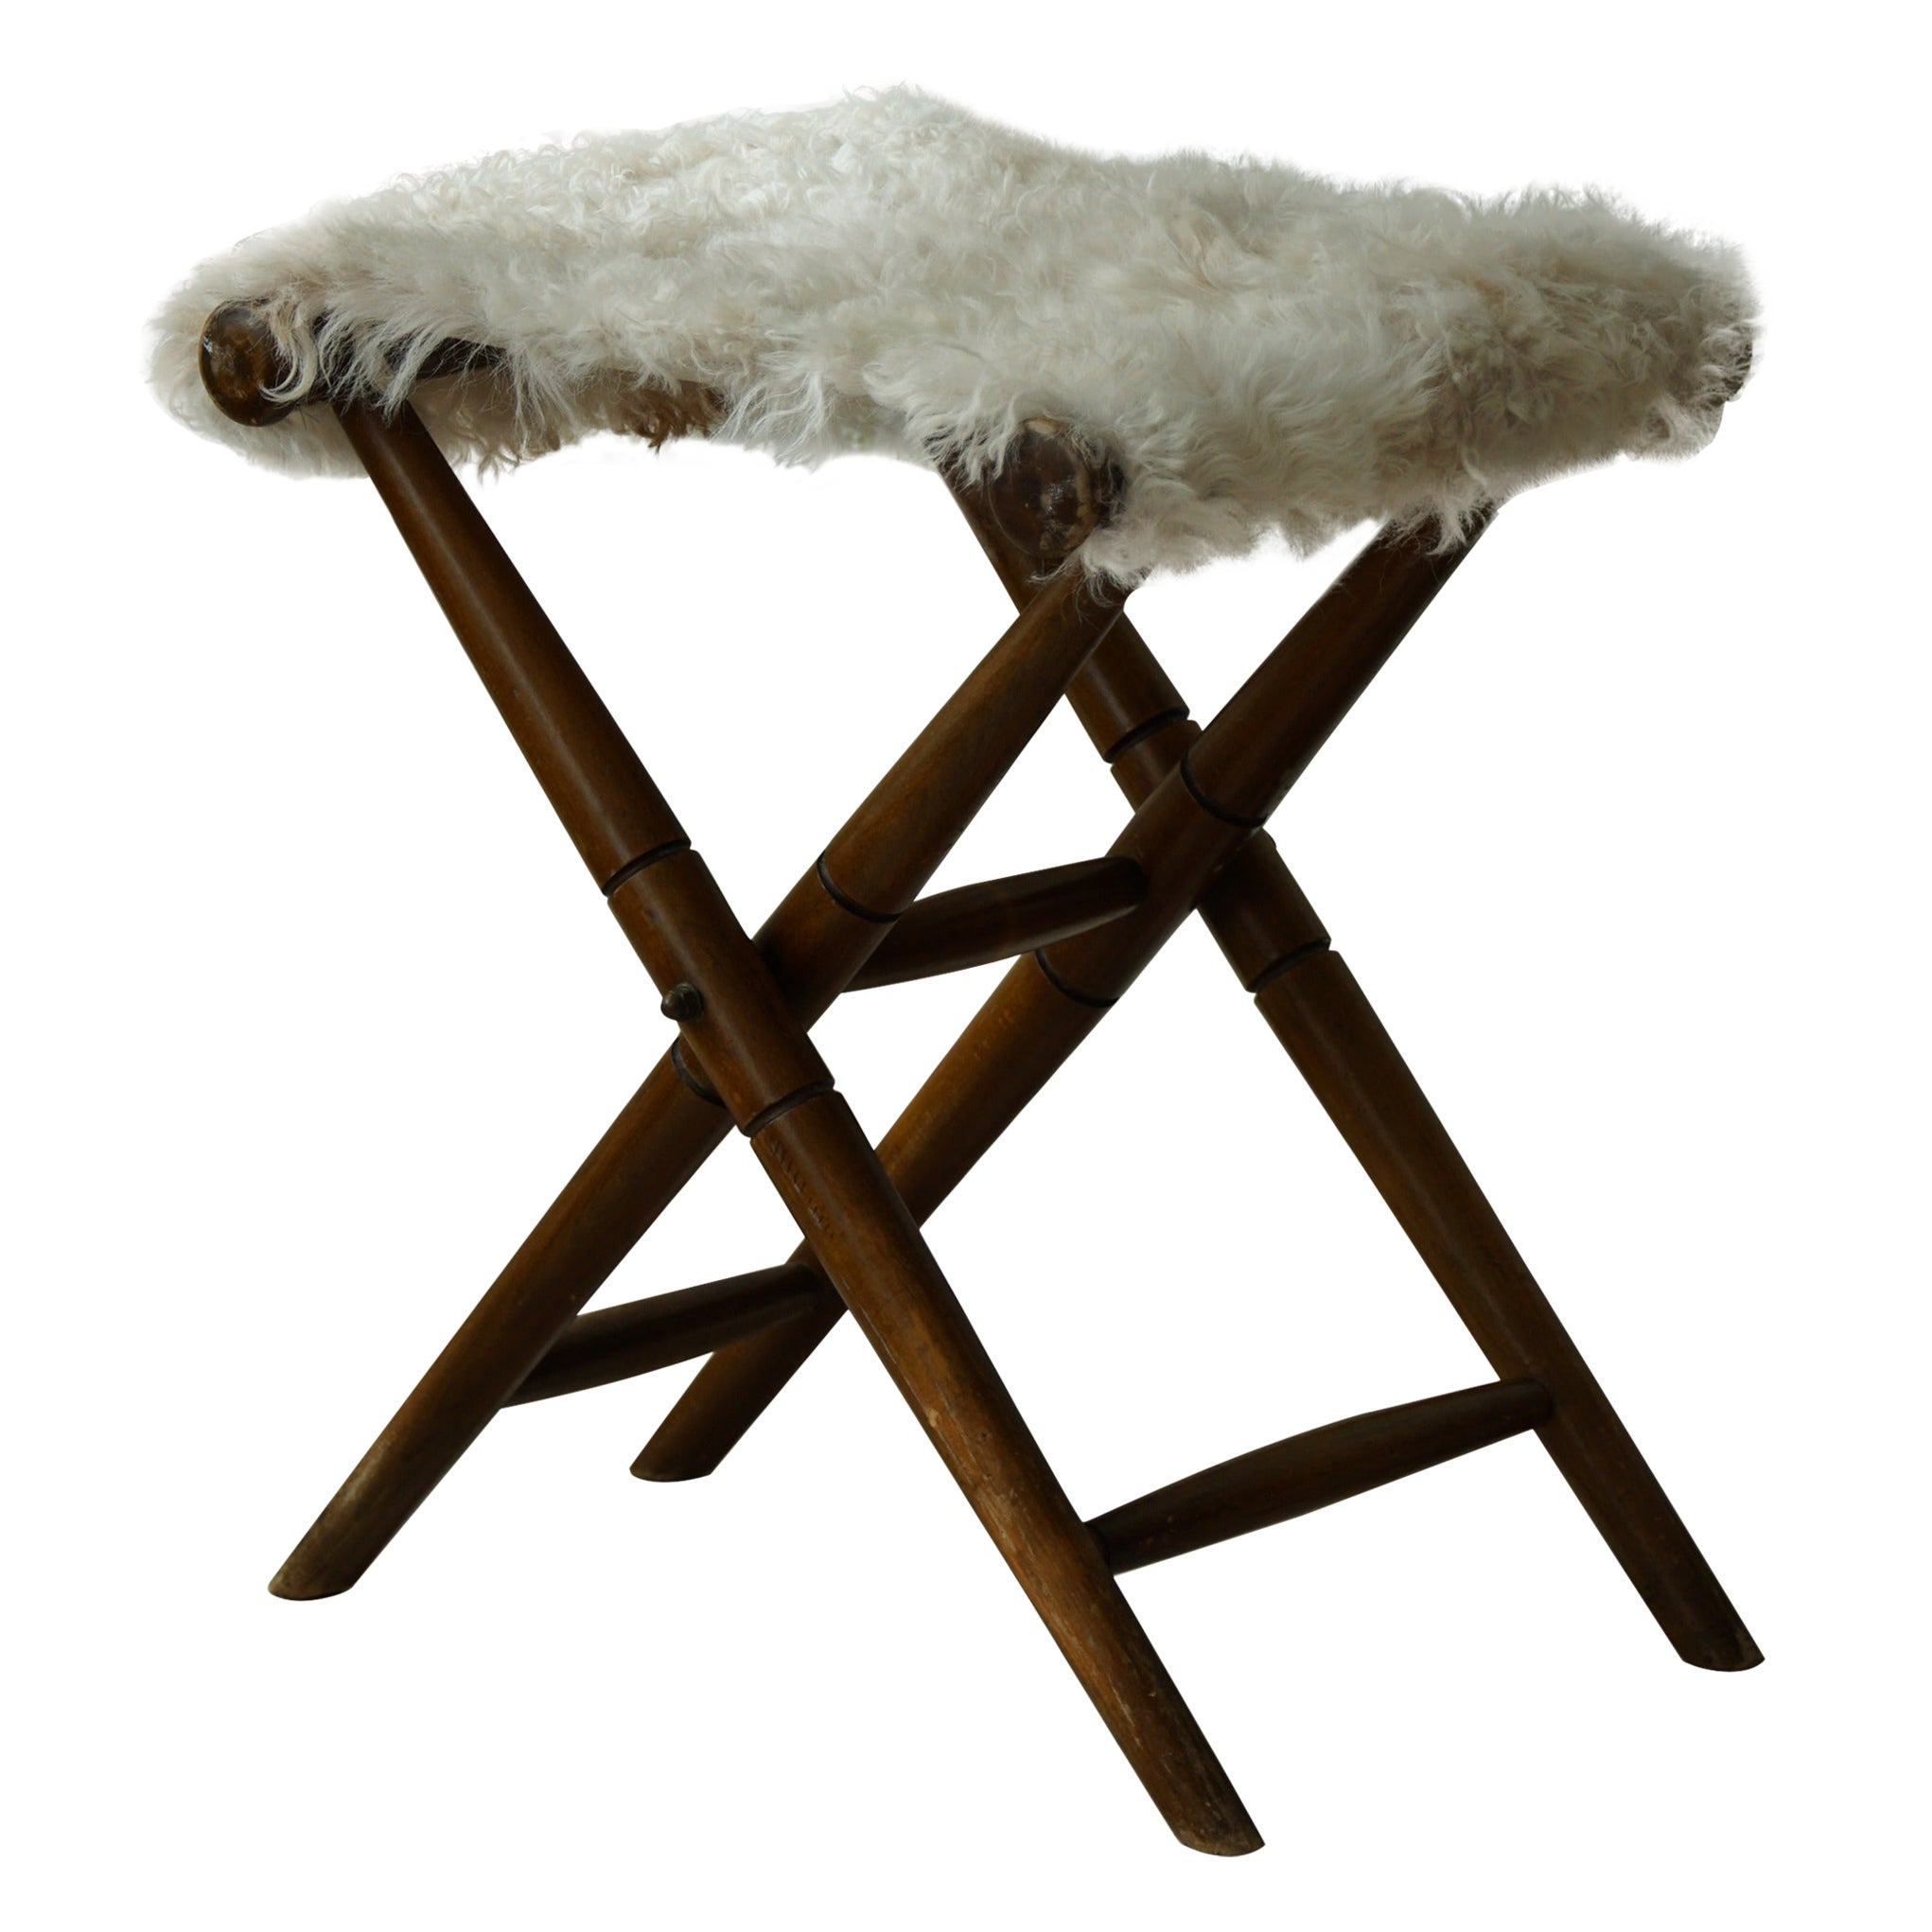 Foldable Stool, Reupholstered in Longhaired Sheepskin, Mid-Century Modern, 1950s For Sale